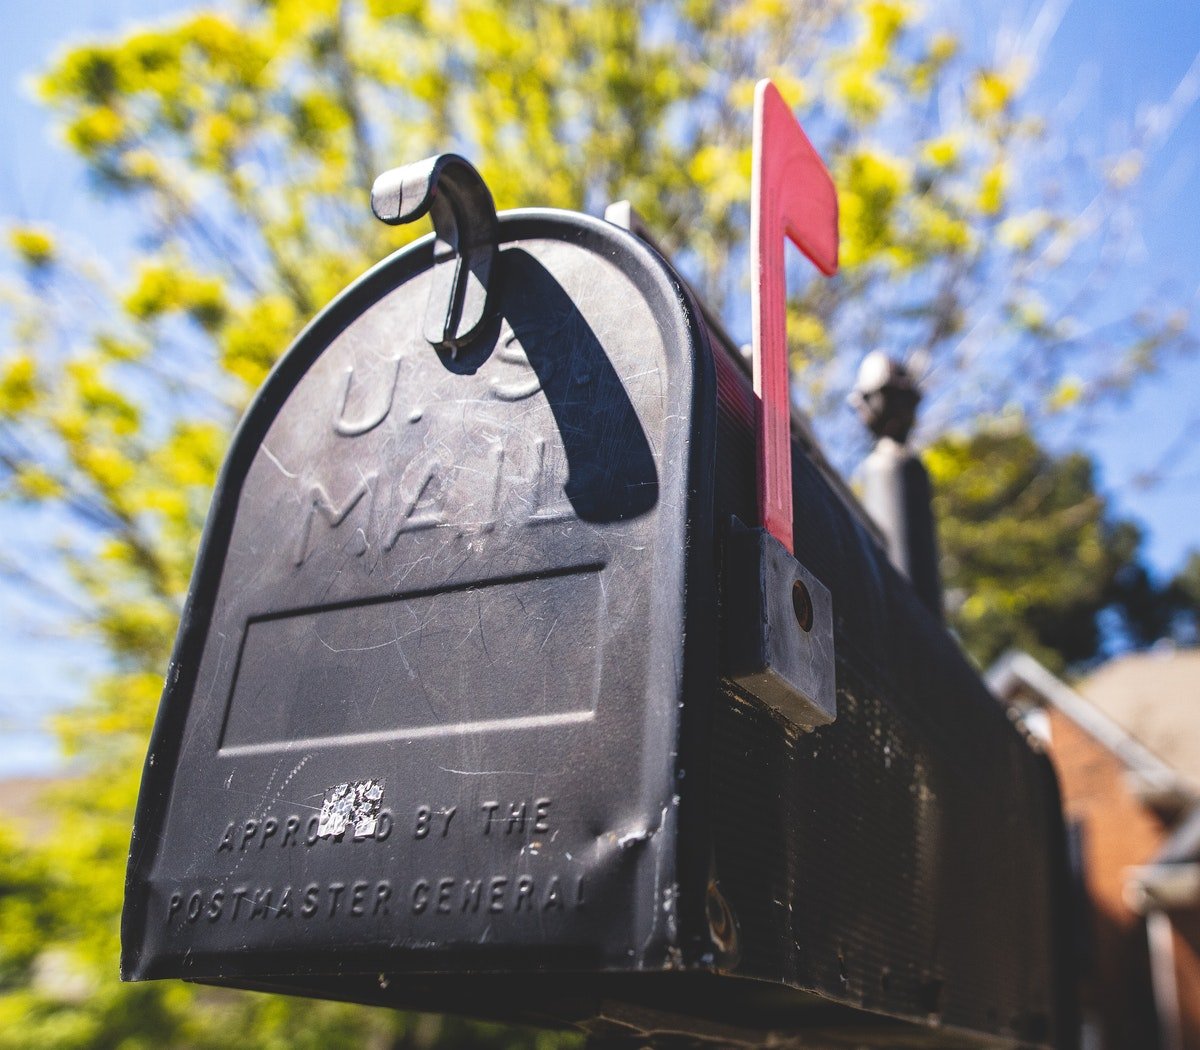 5 Tips for Building an Effective Direct Marketing Campaign